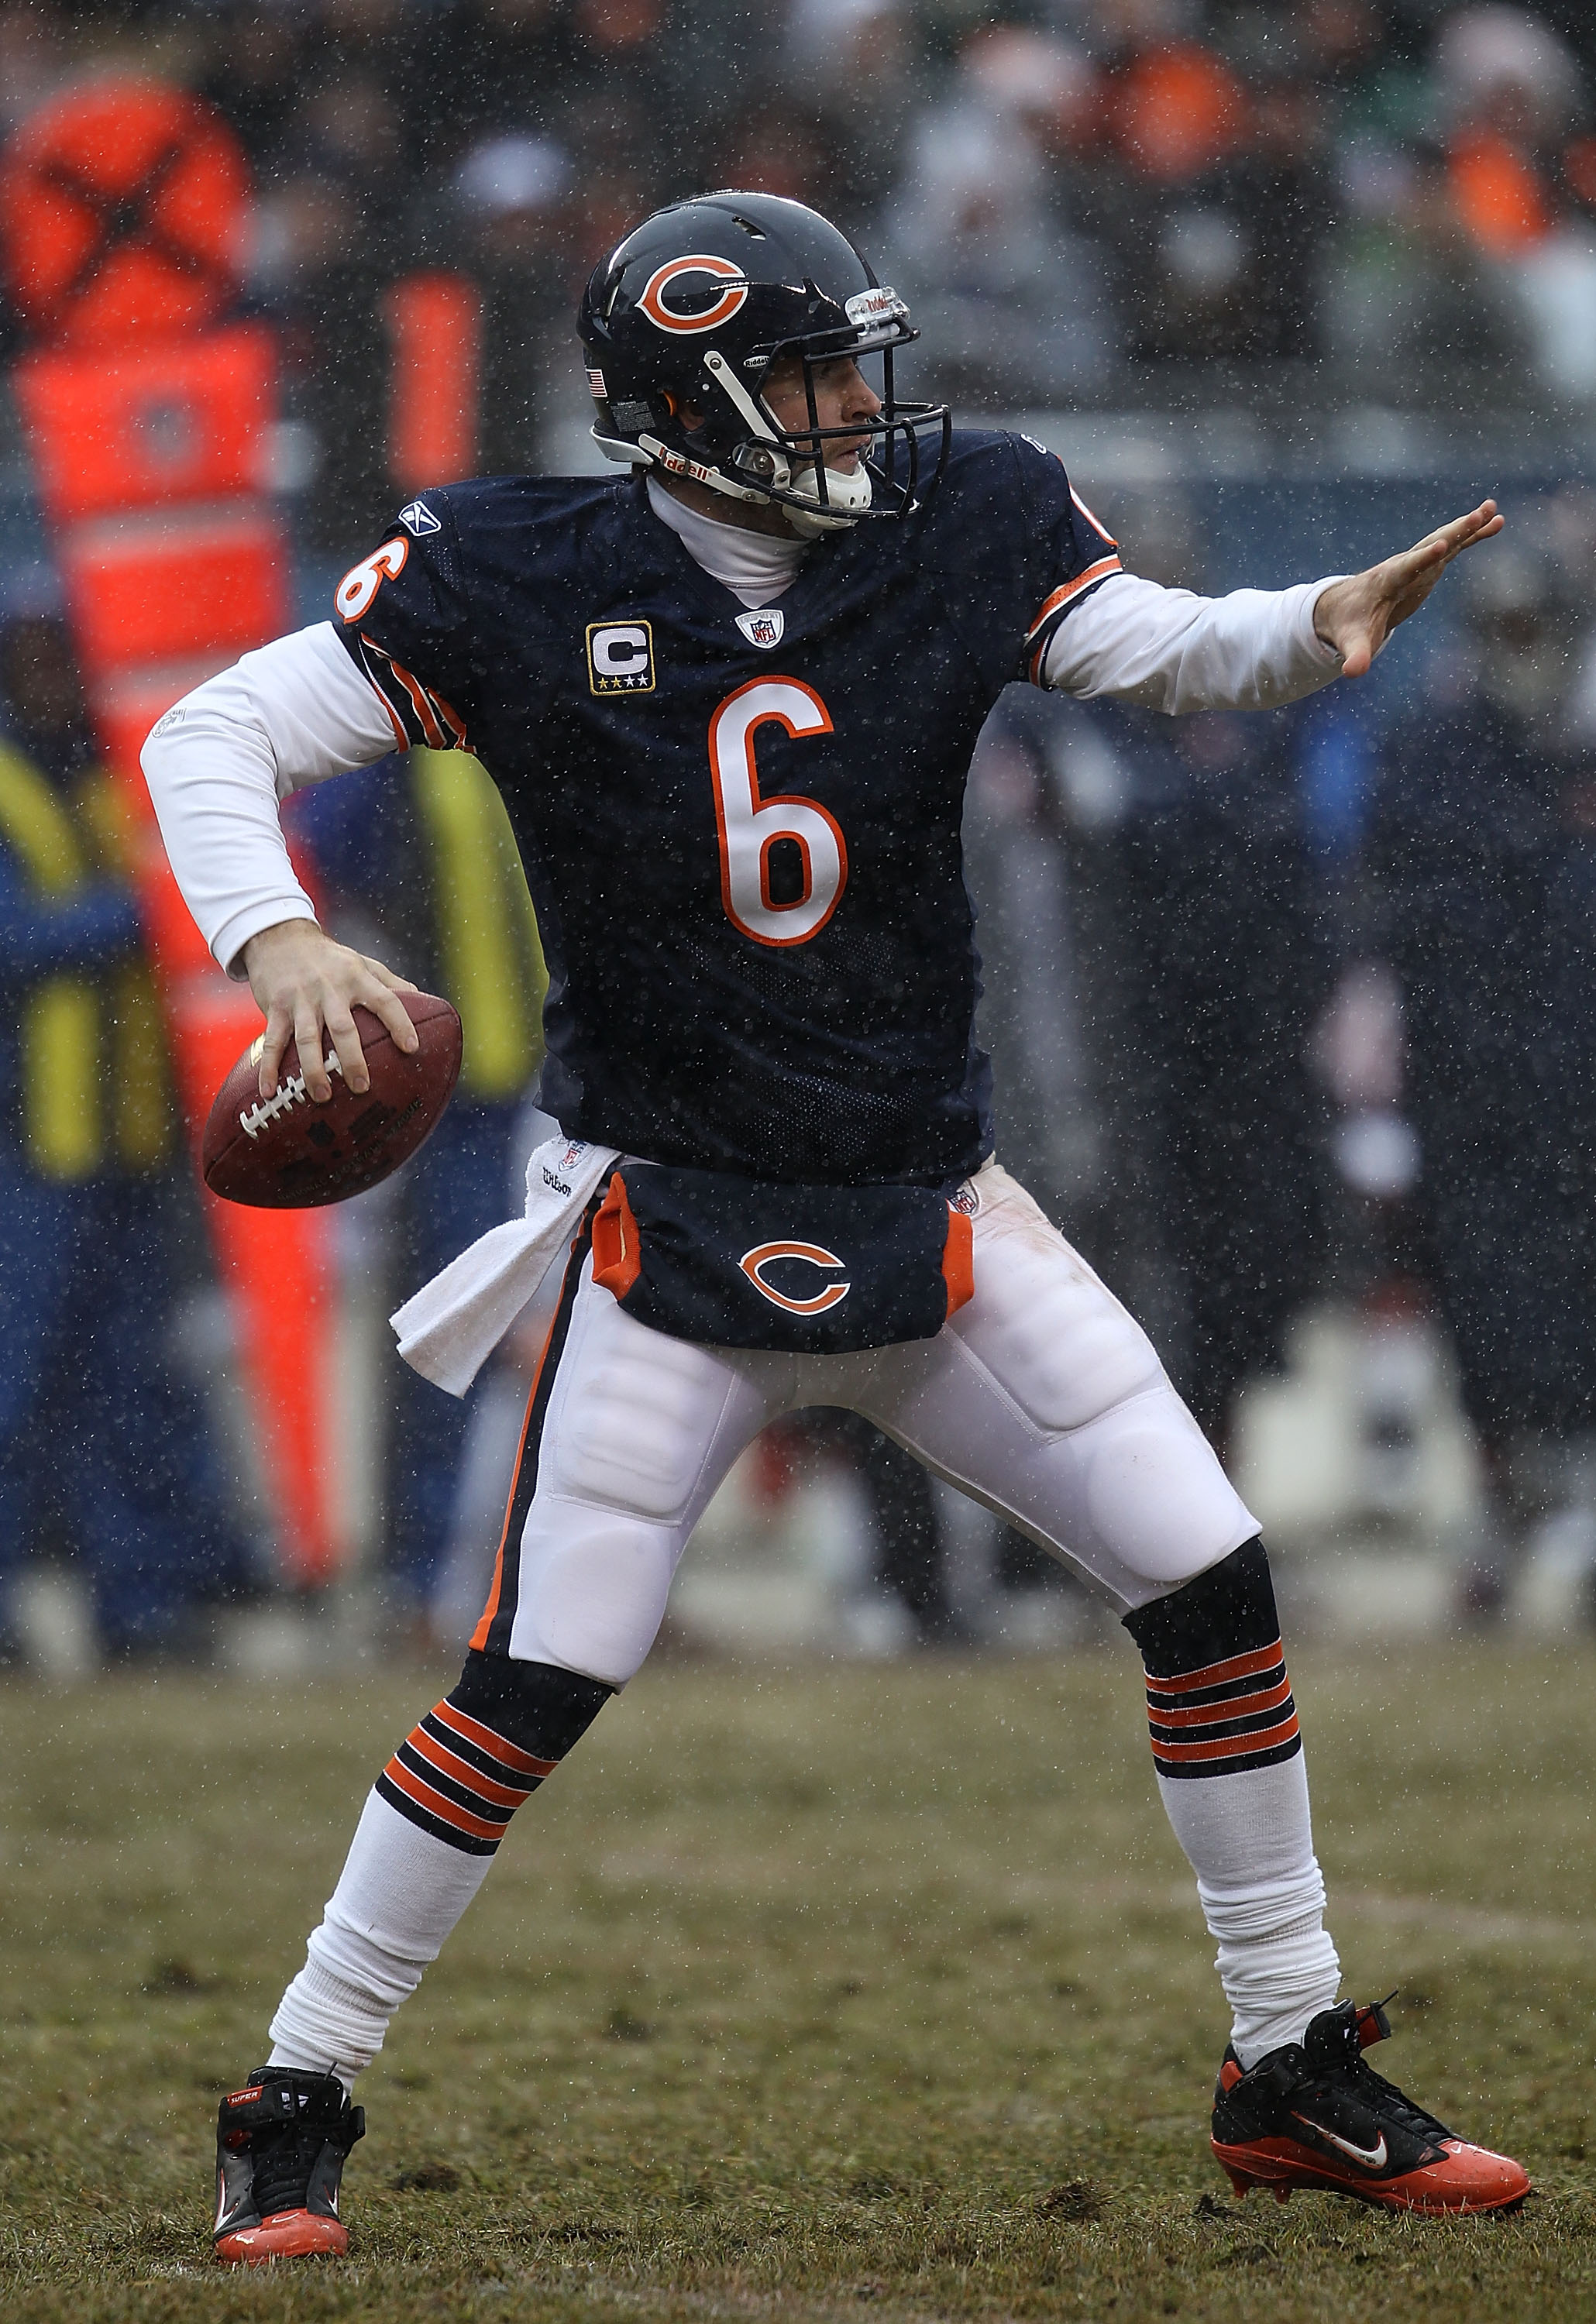 CHICAGO, IL - DECEMBER 26: Jay Cutler #6 of the Chicago Bears throws a pass against the New York Jets rushes at Soldier Field on December 26, 2010 in Chicago, Illinois. The Bears defeated the Jets 38-34.  (Photo by Jonathan Daniel/Getty Images)